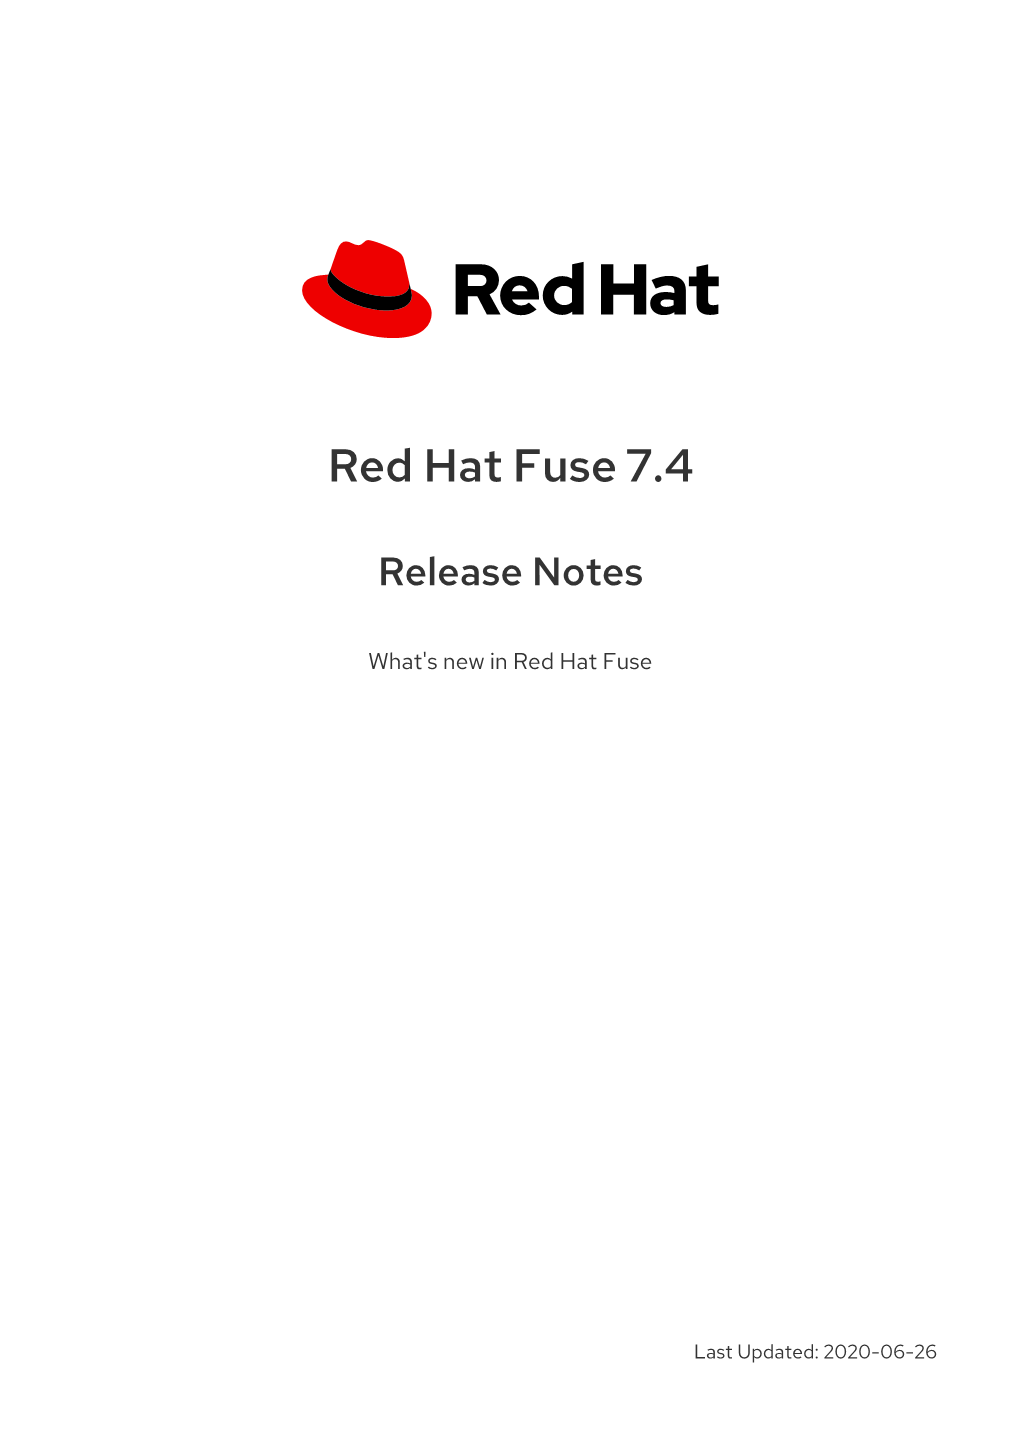 Red Hat Fuse 7.4 Release Notes